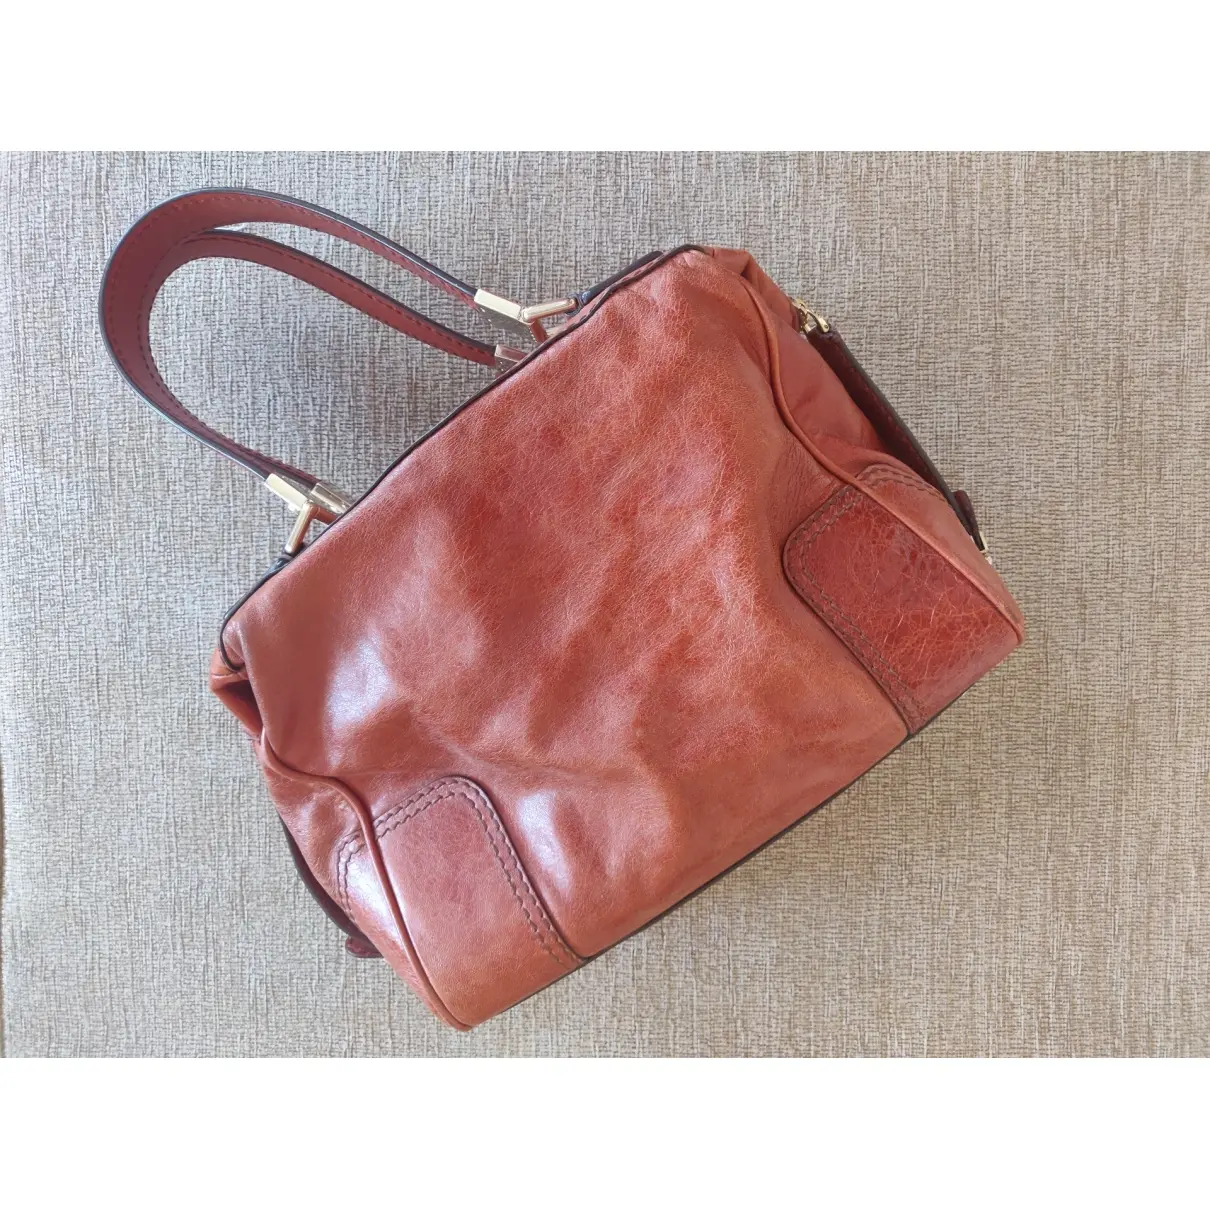 D&G Patent leather bag for sale